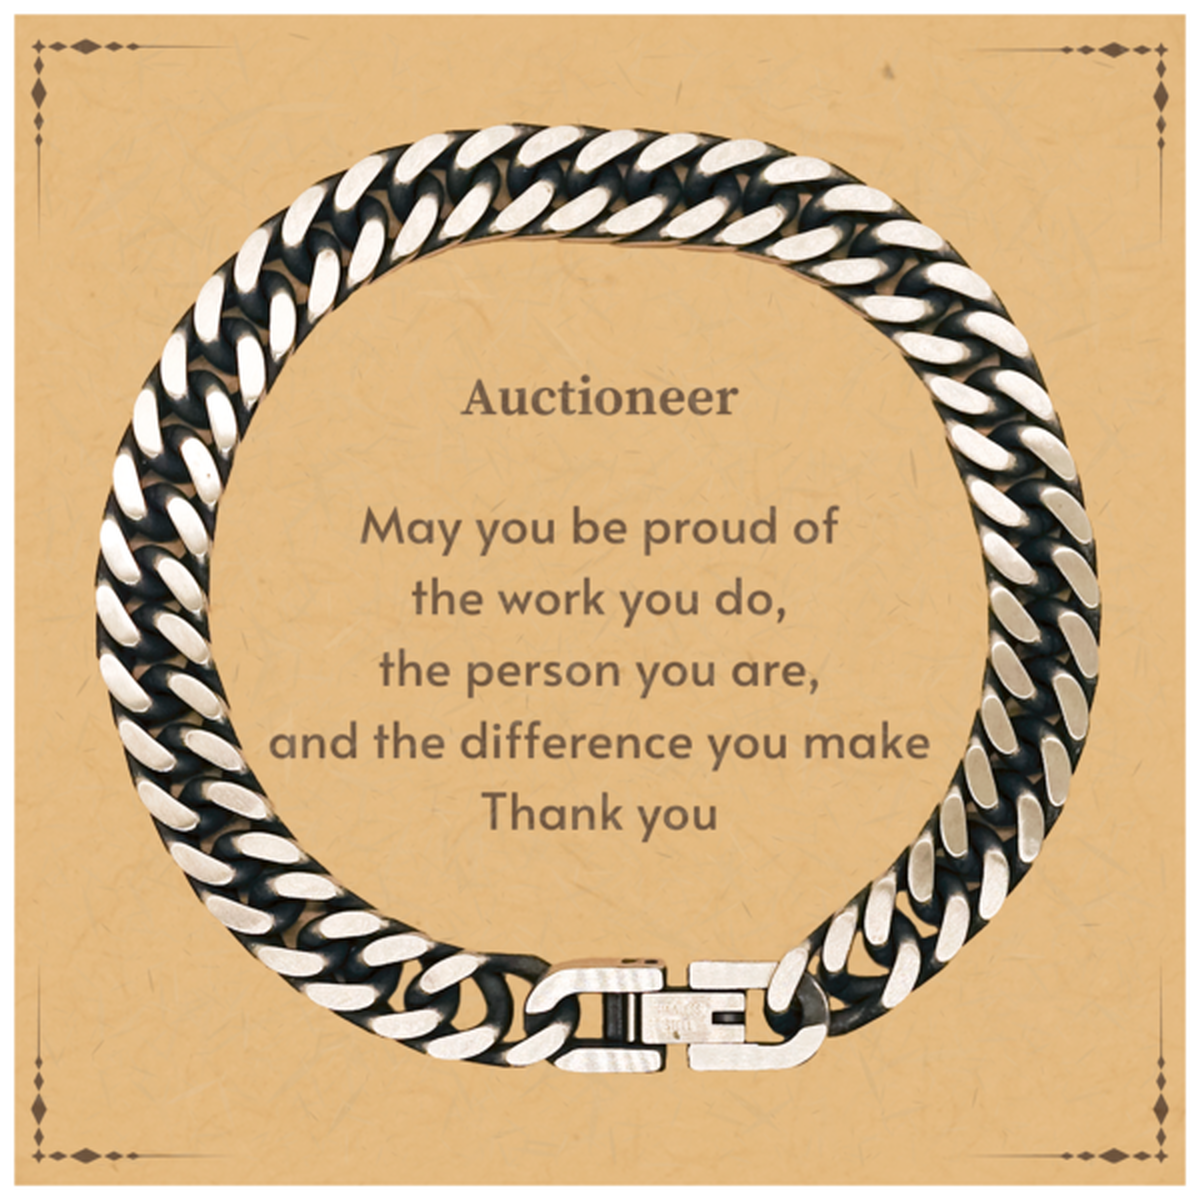 Heartwarming Cuban Link Chain Bracelet Retirement Coworkers Gifts for Auctioneer, Auctioneer May You be proud of the work you do, the person you are Gifts for Boss Men Women Friends